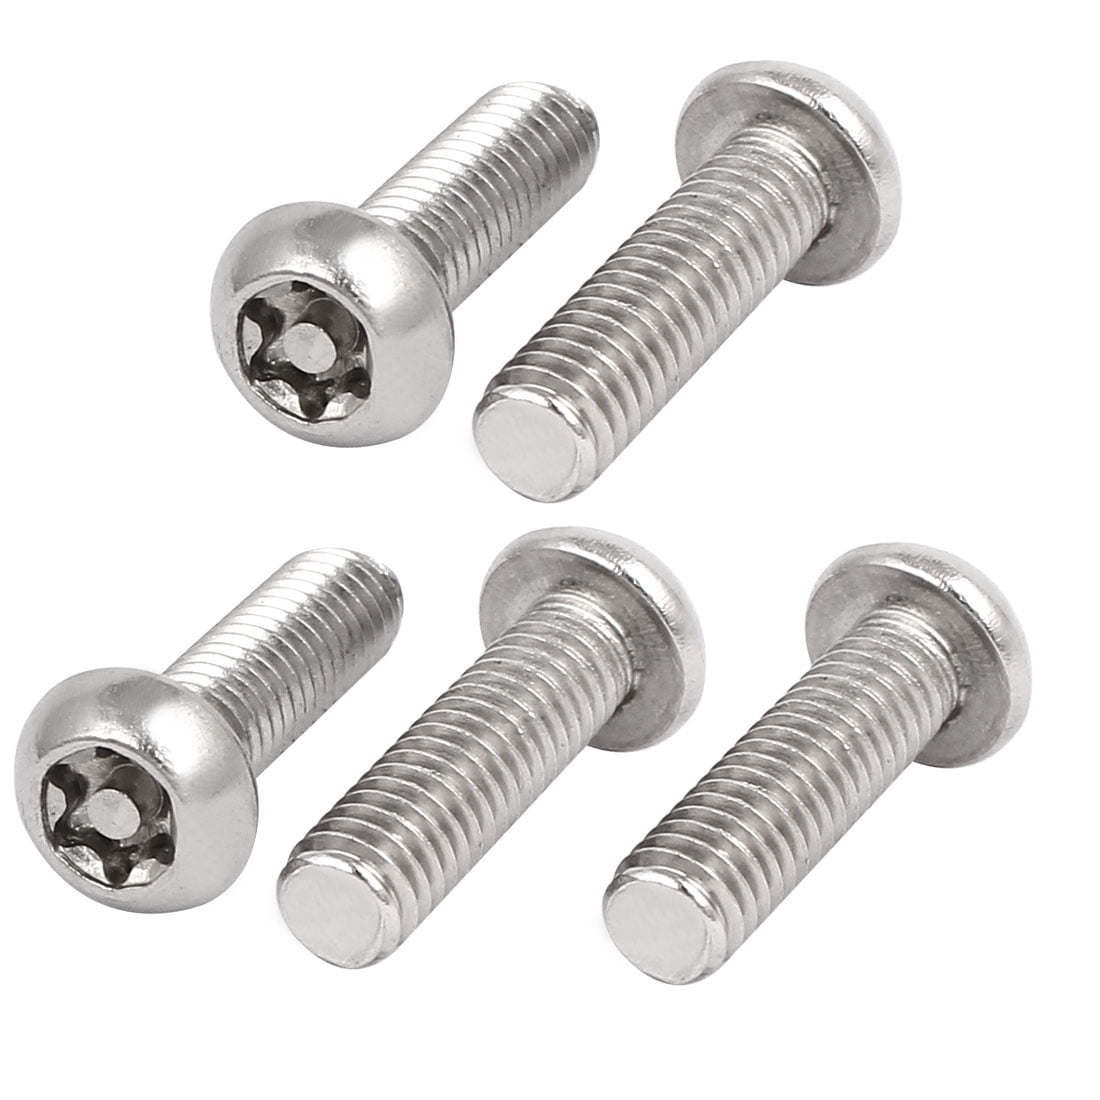 25pcs Metric M6x50mm 1.0mm Pitch Stainless Steel Wing Bolt Butterfly Bolt Screw 